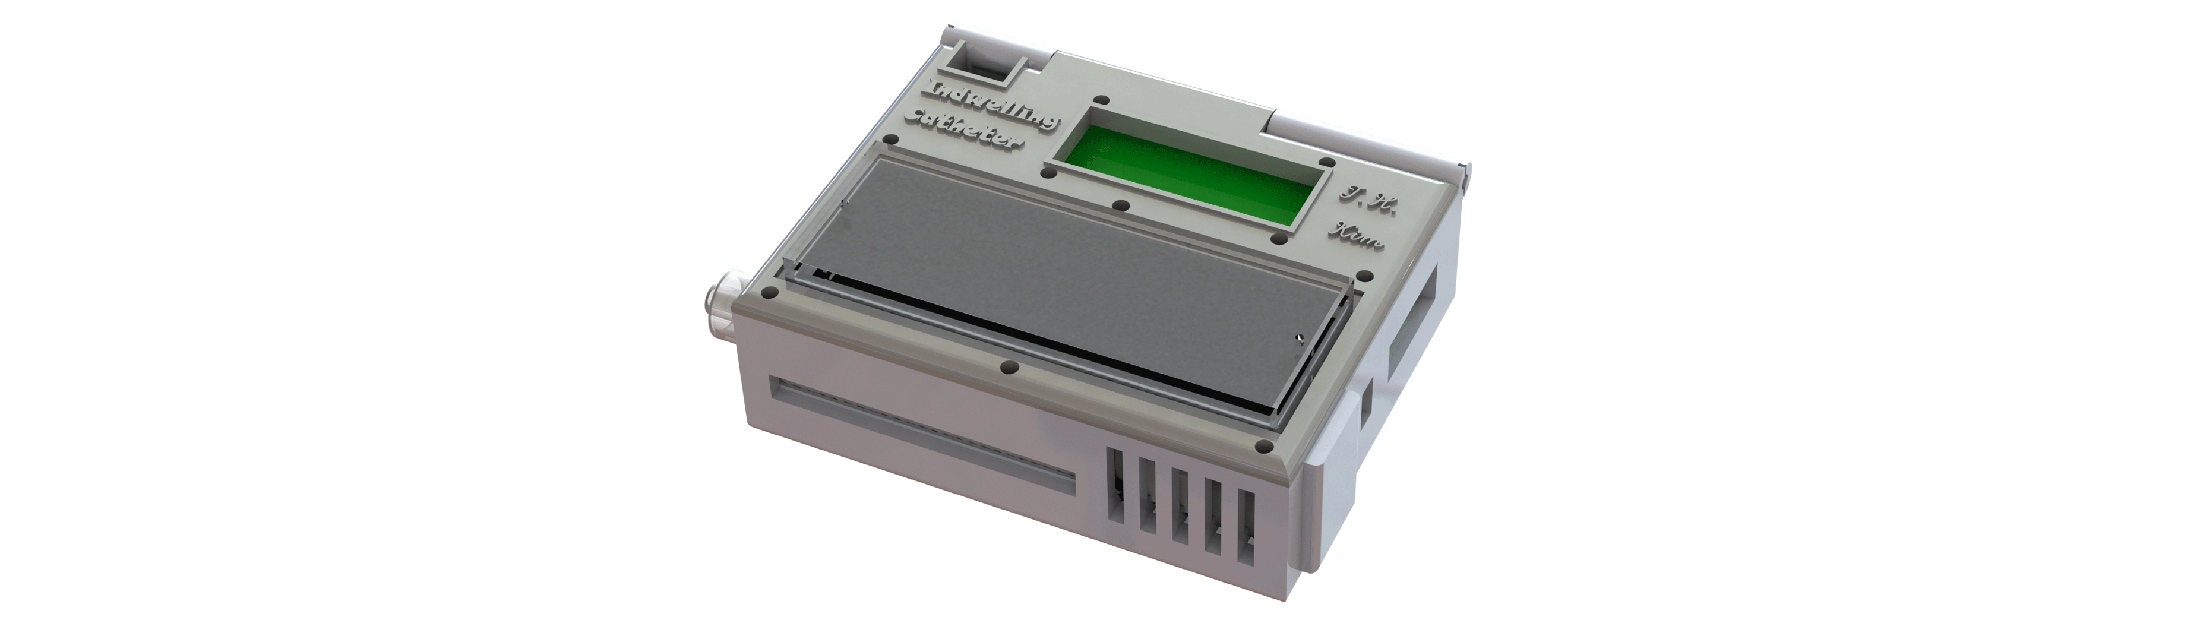 A device in the shape of a gray box.